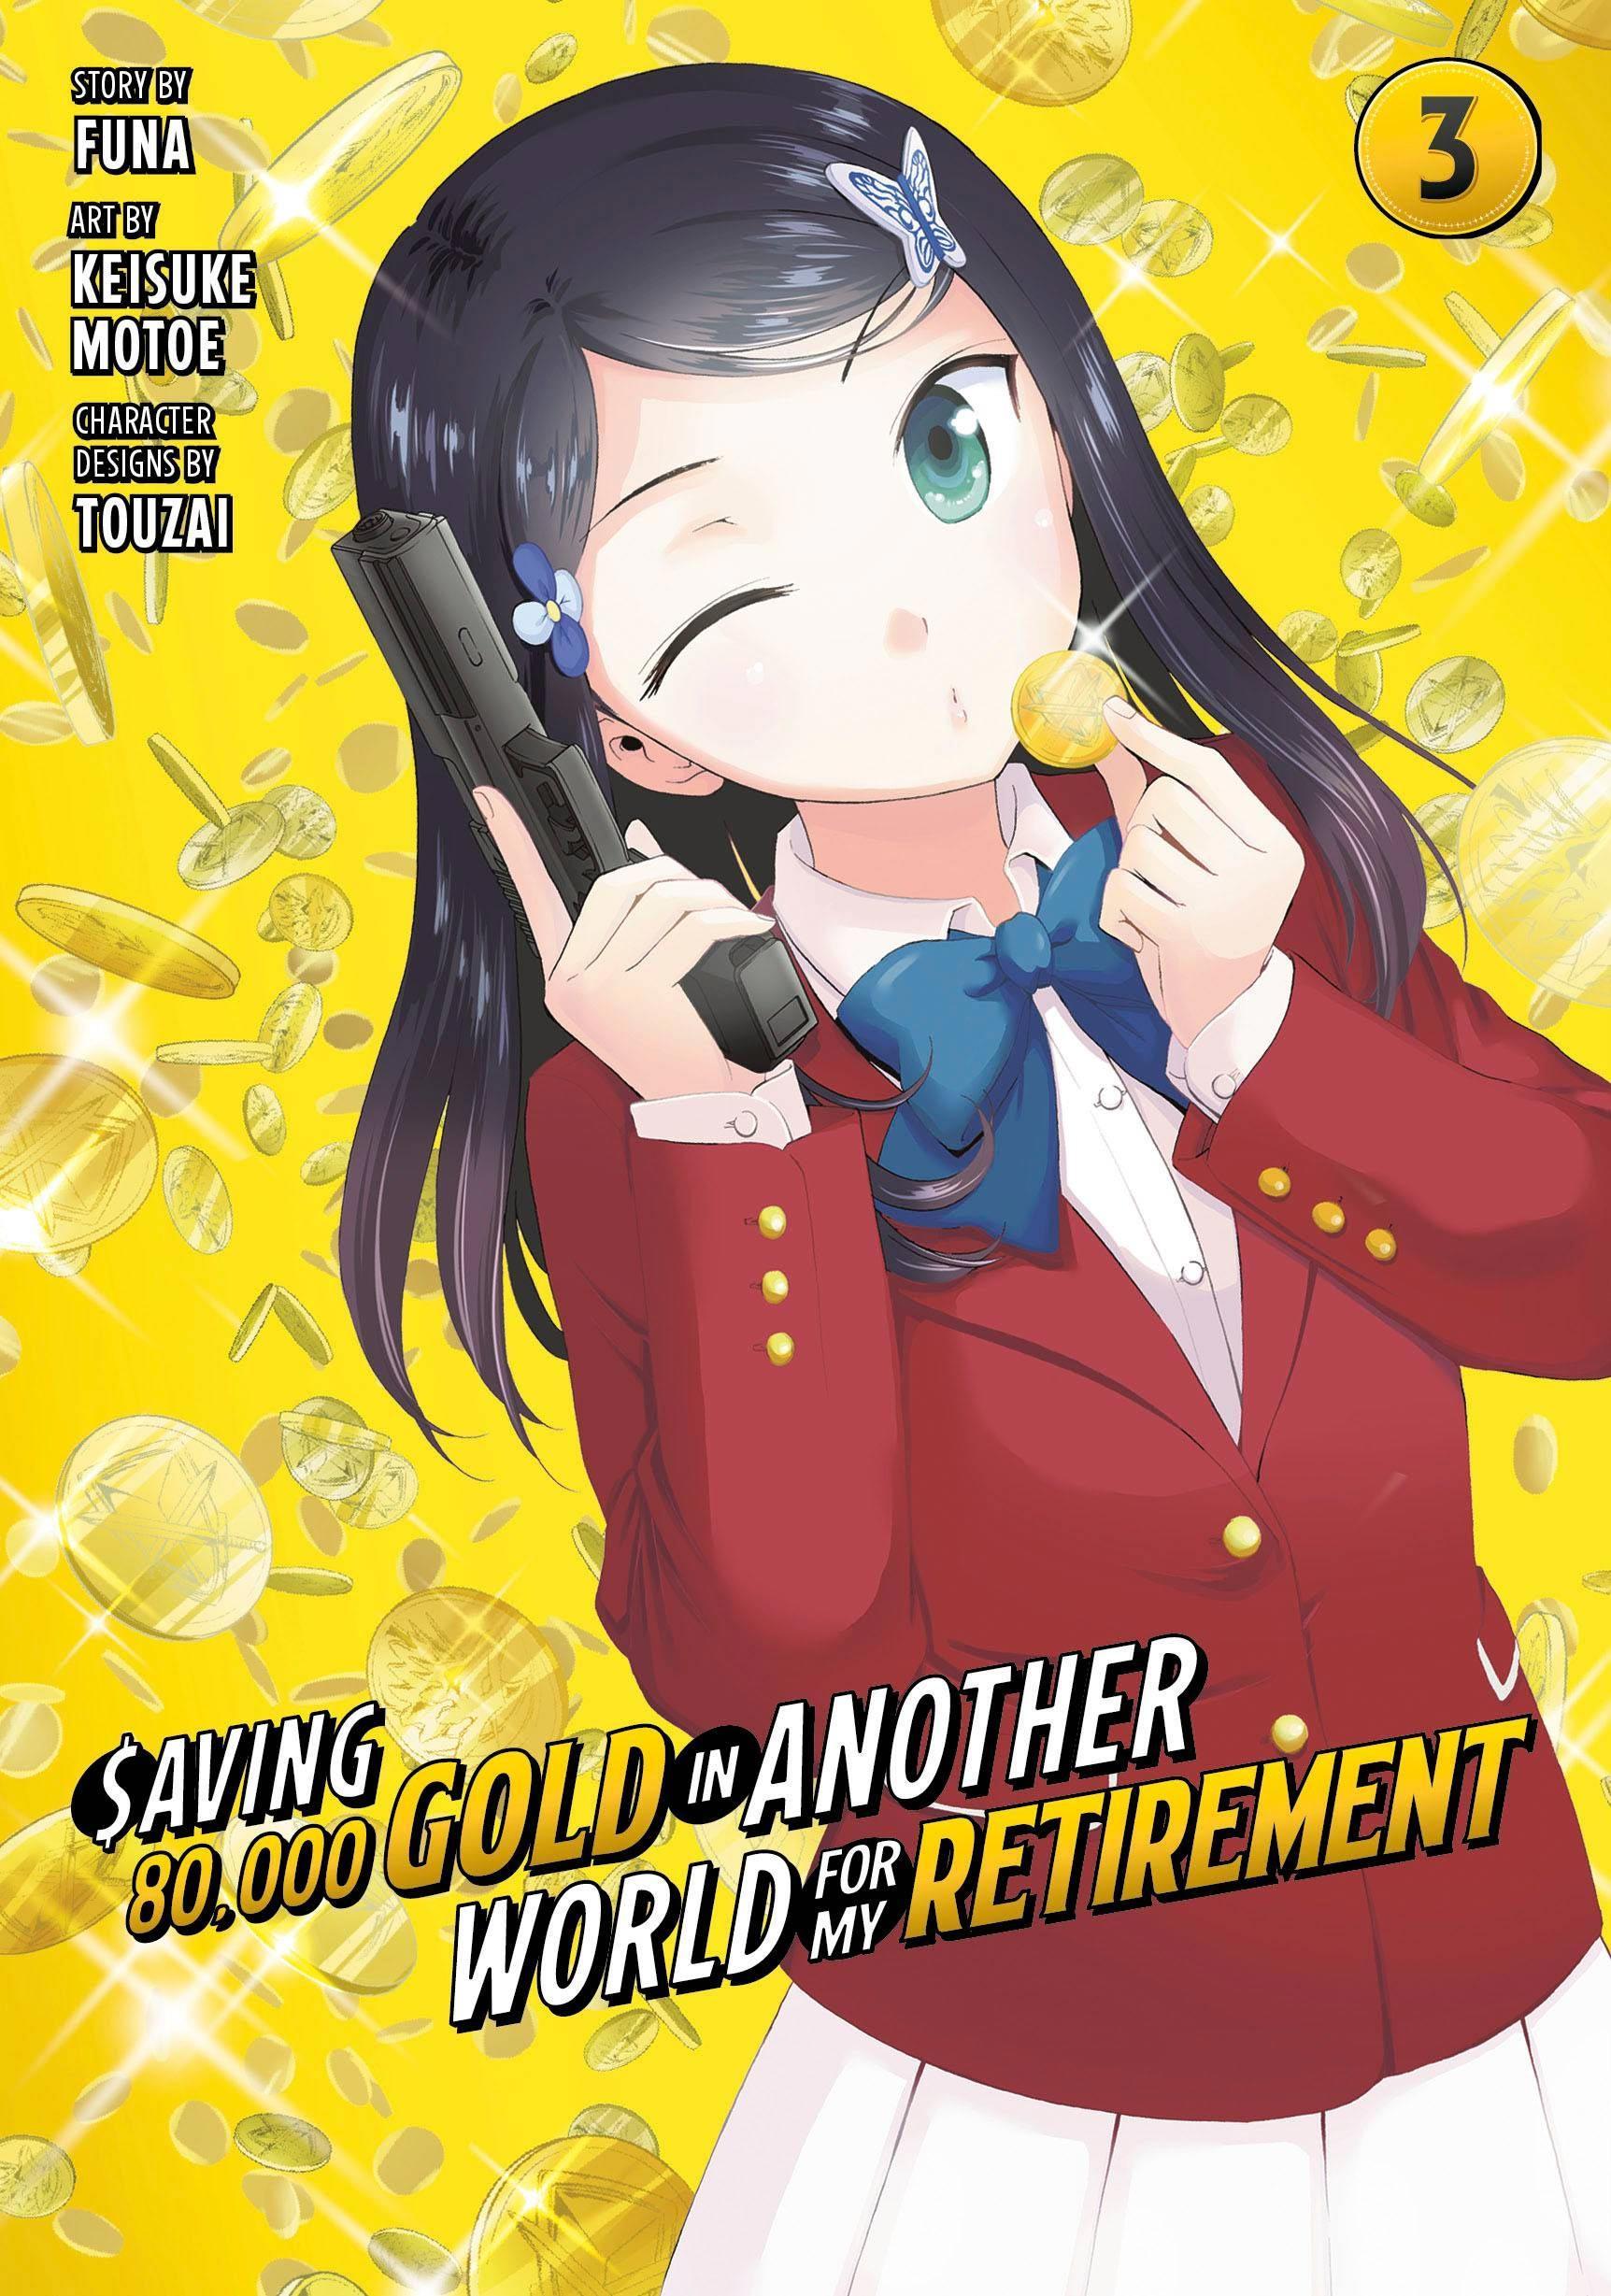 SAVING 80K GOLD IN ANOTHER WORLD GN VOL 03 - Kings Comics